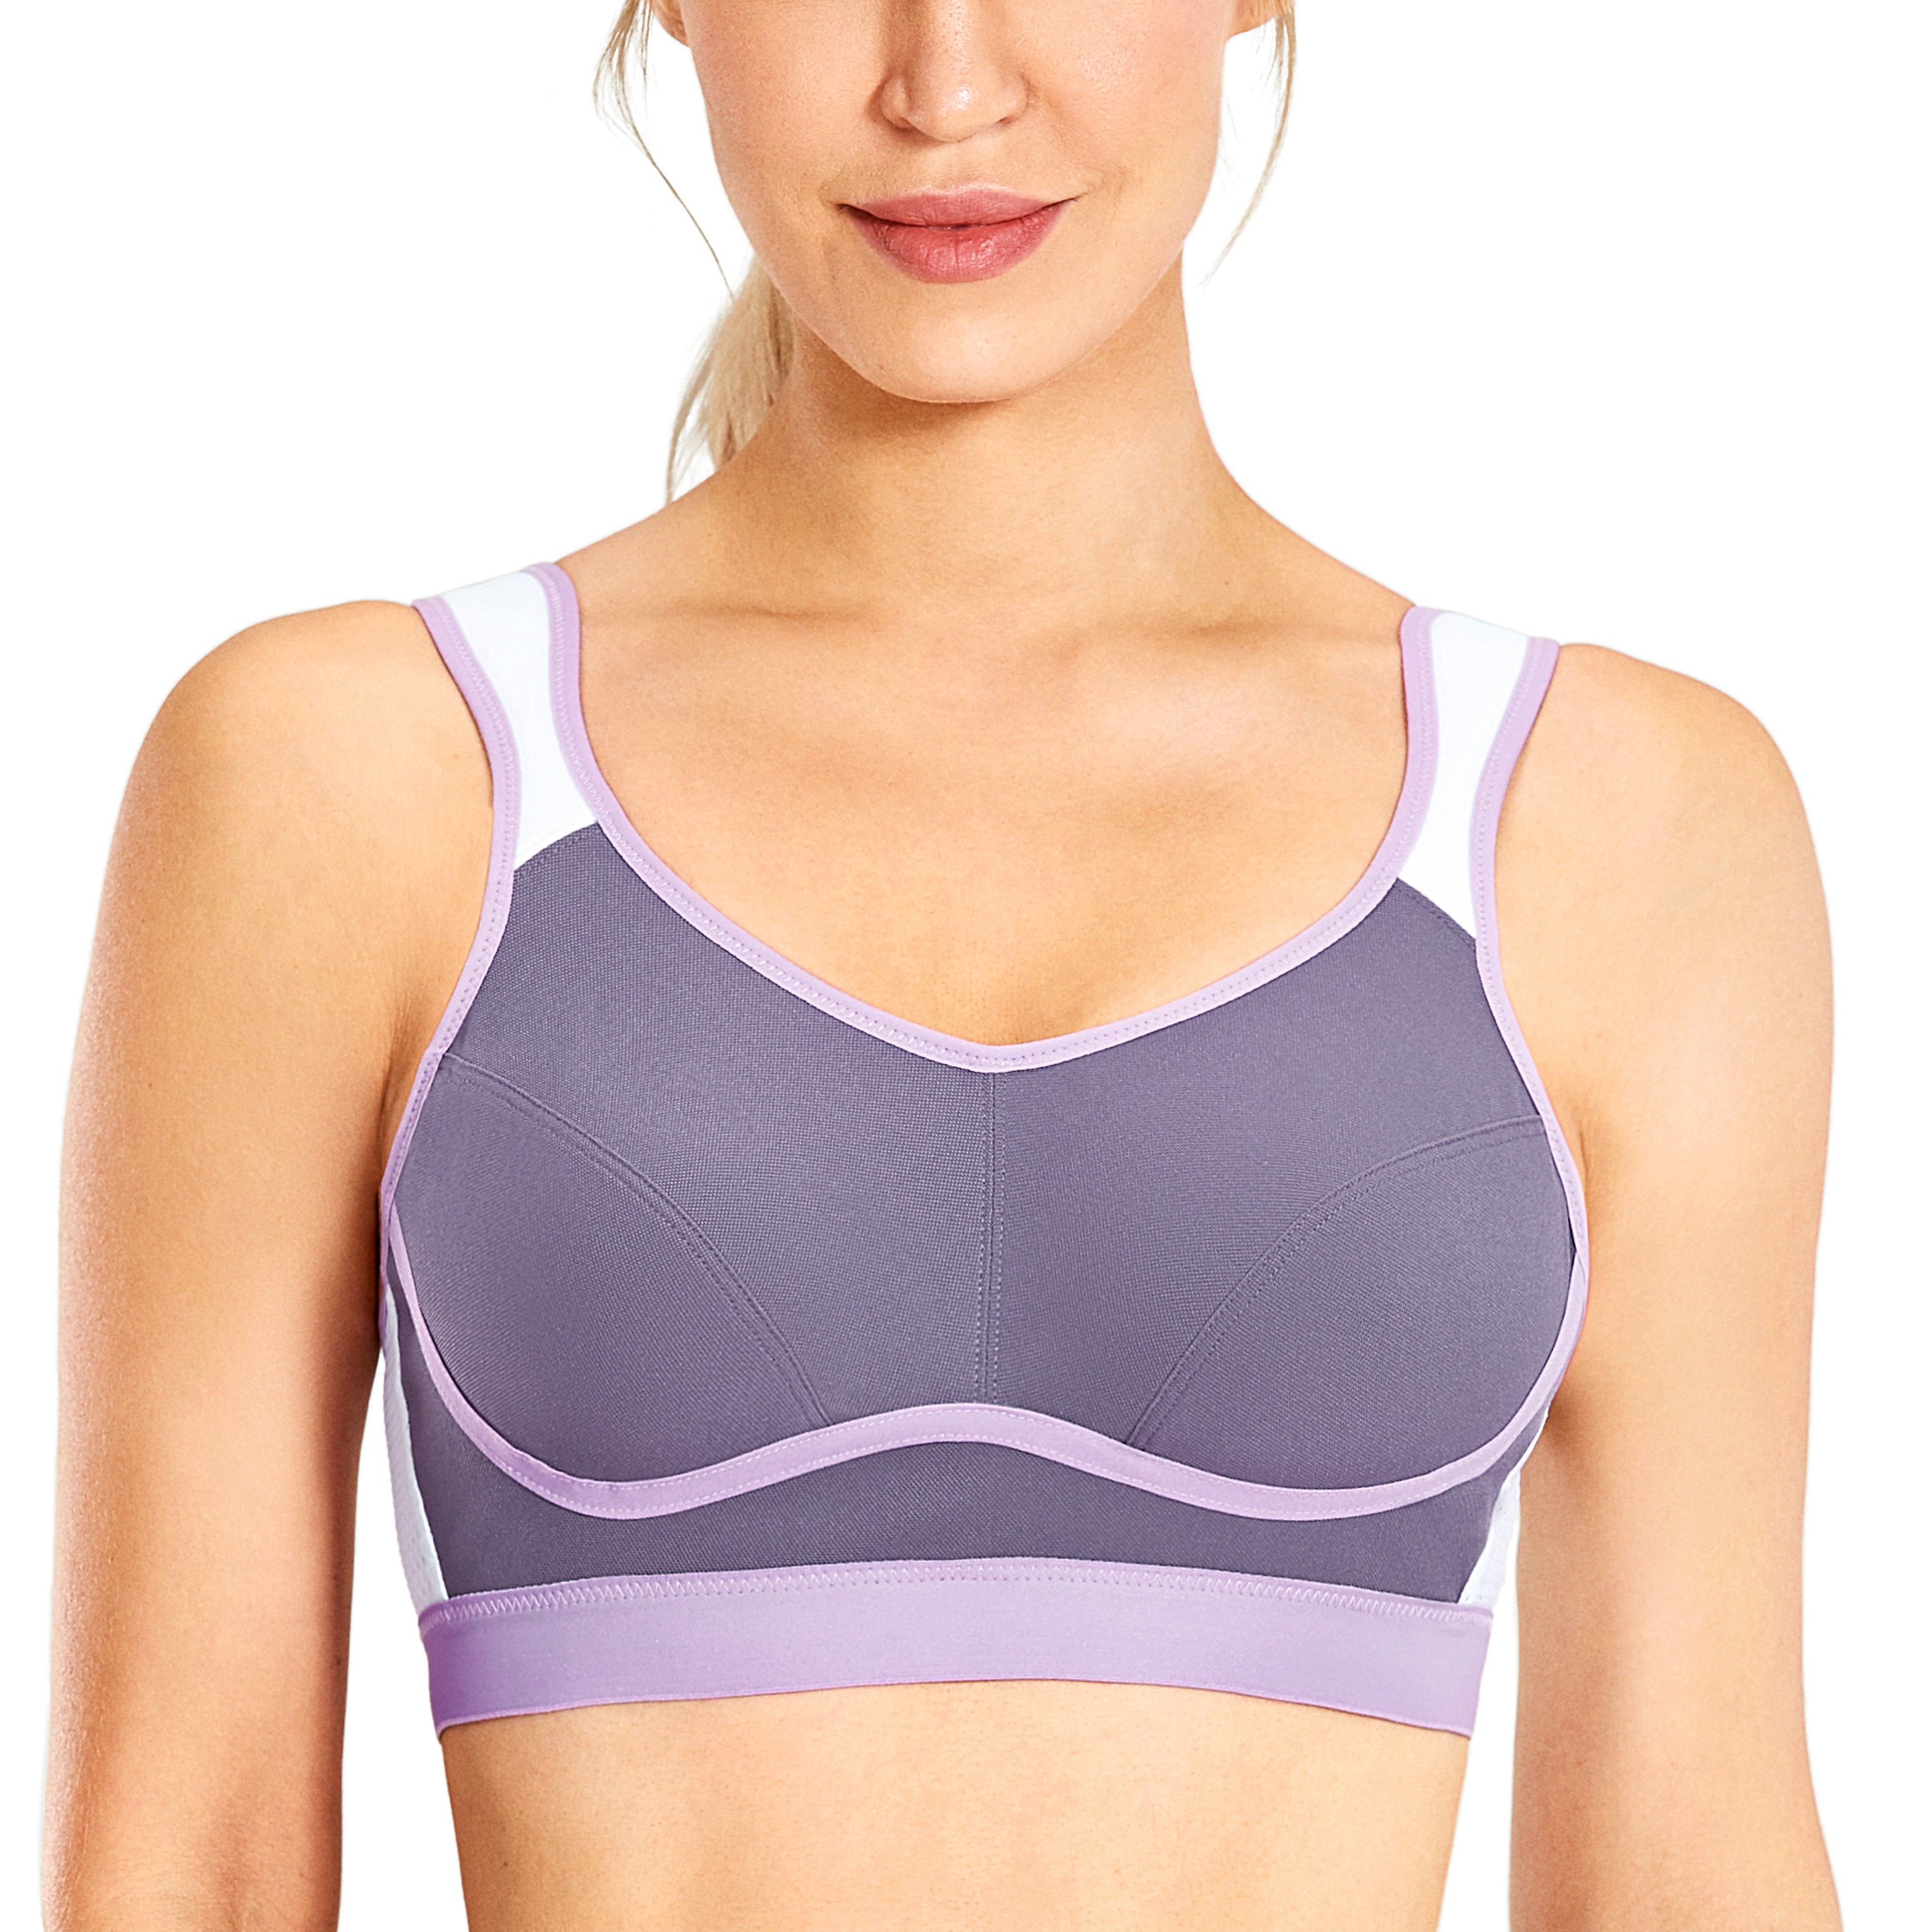 SYROKAN Women's High Impact Support Wirefree Bounce Control Plus Size Workout  Sports Bra - Walmart.com